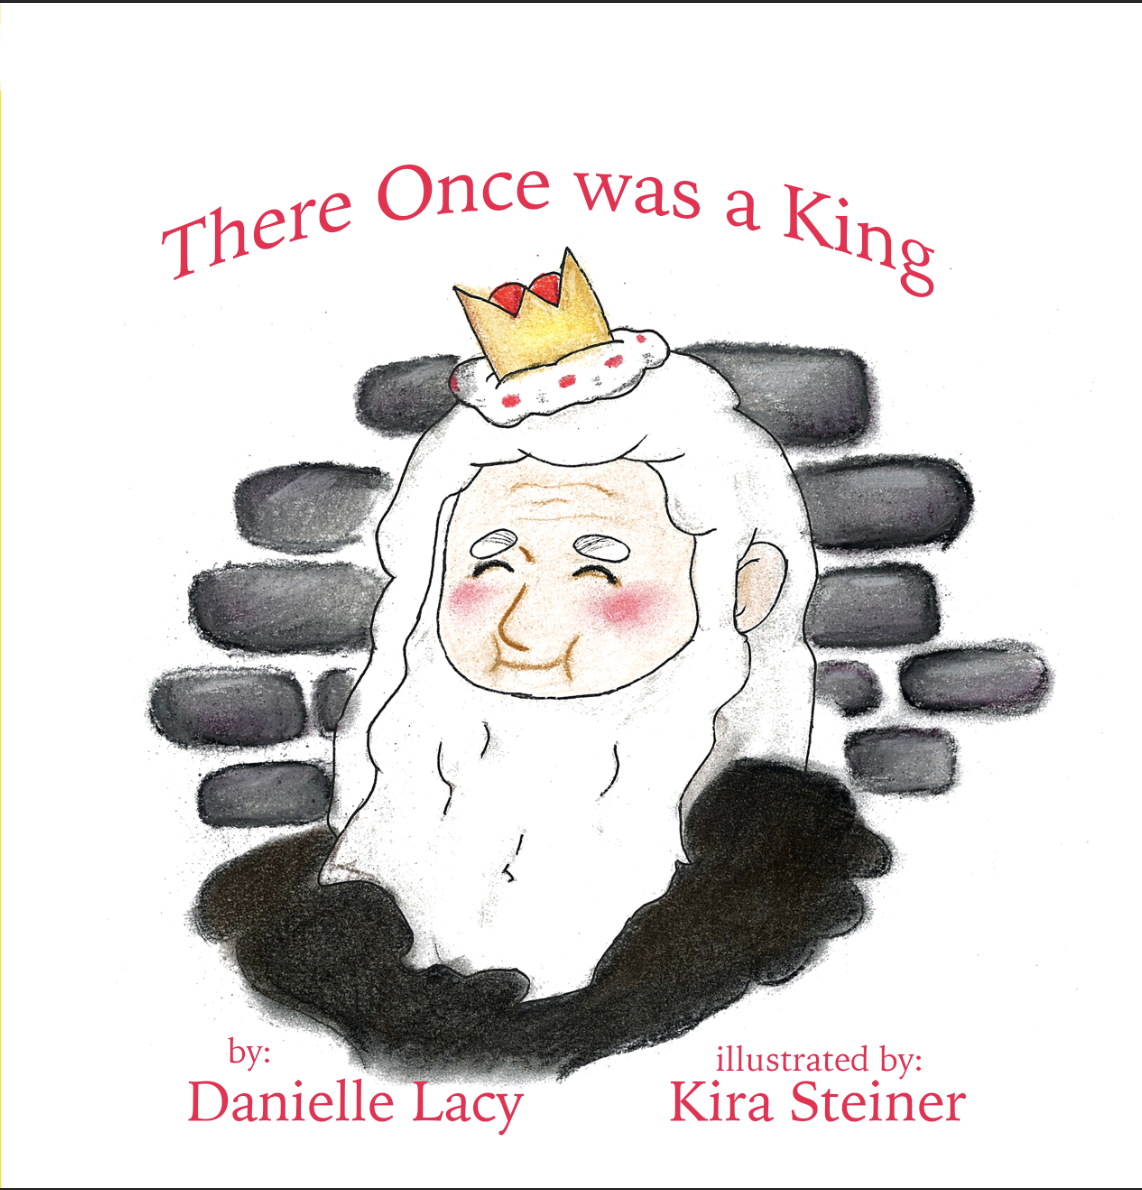 There Once was a King (Book)